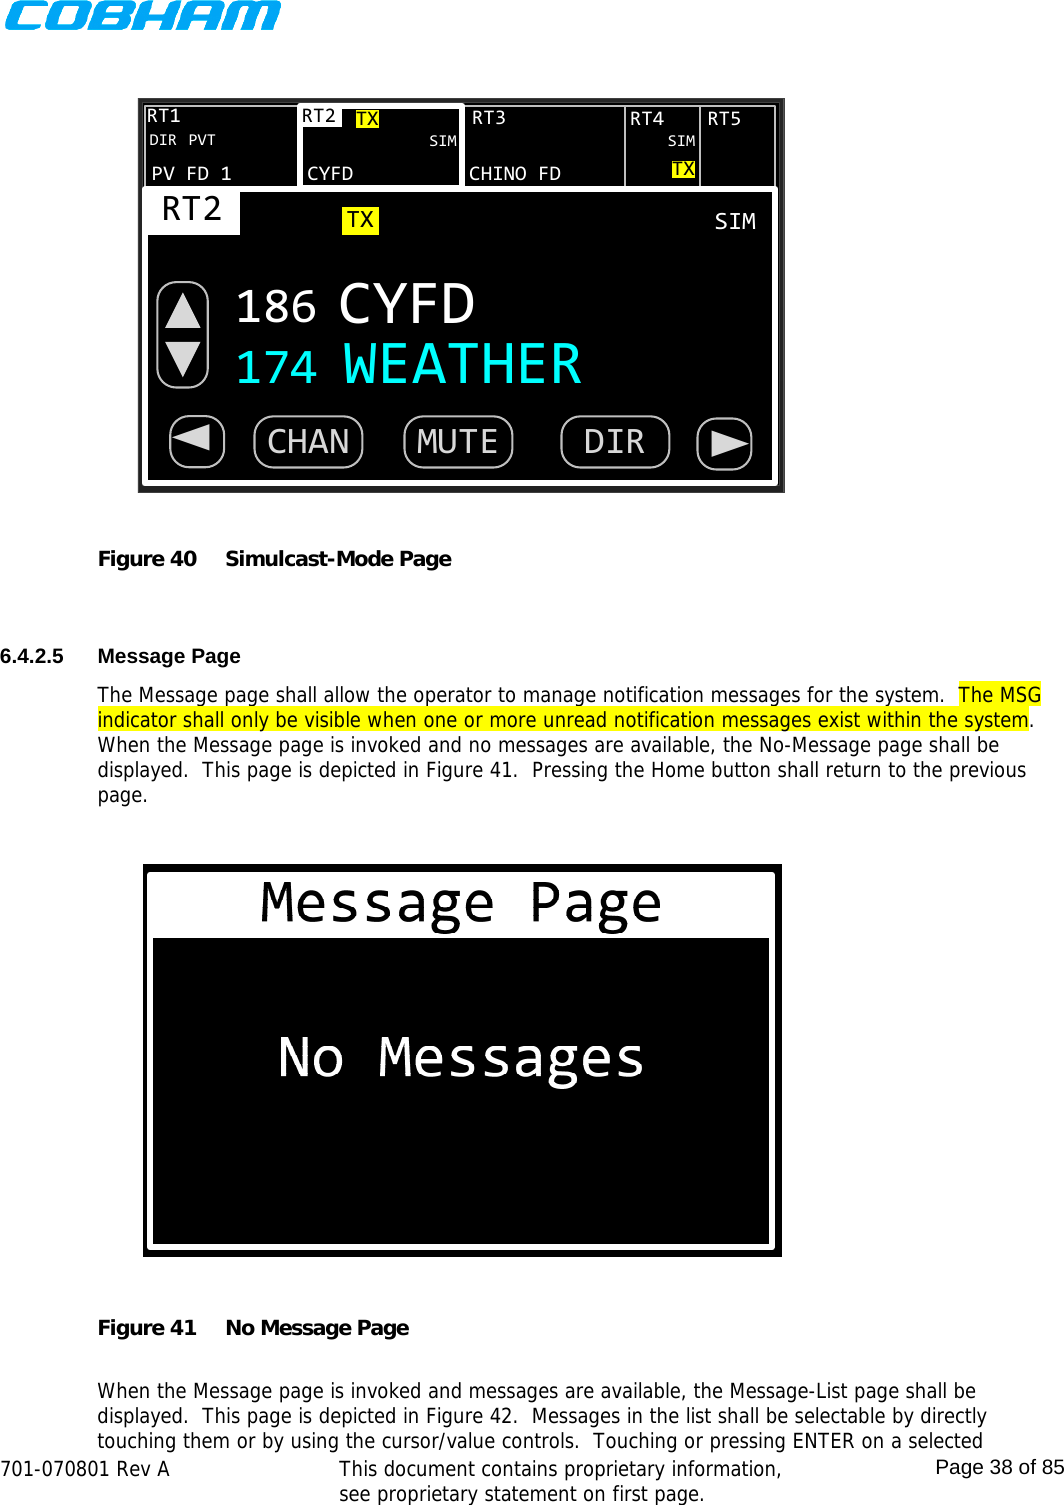    701-070801 Rev A   This document contains proprietary information, see proprietary statement on first page.  Page 38 of 85  CYFDRT2CHINO FDRT3RT2186 CYFDTXDIR PVTRT4 RT5RT1PV FD 1SIM SIMTXTXSIM174 WEATHERCHAN MUTE DIR◄◄ Figure 40  Simulcast-Mode Page   6.4.2.5 Message Page The Message page shall allow the operator to manage notification messages for the system.  The MSG indicator shall only be visible when one or more unread notification messages exist within the system.  When the Message page is invoked and no messages are available, the No-Message page shall be displayed.  This page is depicted in Figure 41.  Pressing the Home button shall return to the previous page.  Figure 41  No Message Page  When the Message page is invoked and messages are available, the Message-List page shall be displayed.  This page is depicted in Figure 42.  Messages in the list shall be selectable by directly touching them or by using the cursor/value controls.  Touching or pressing ENTER on a selected 